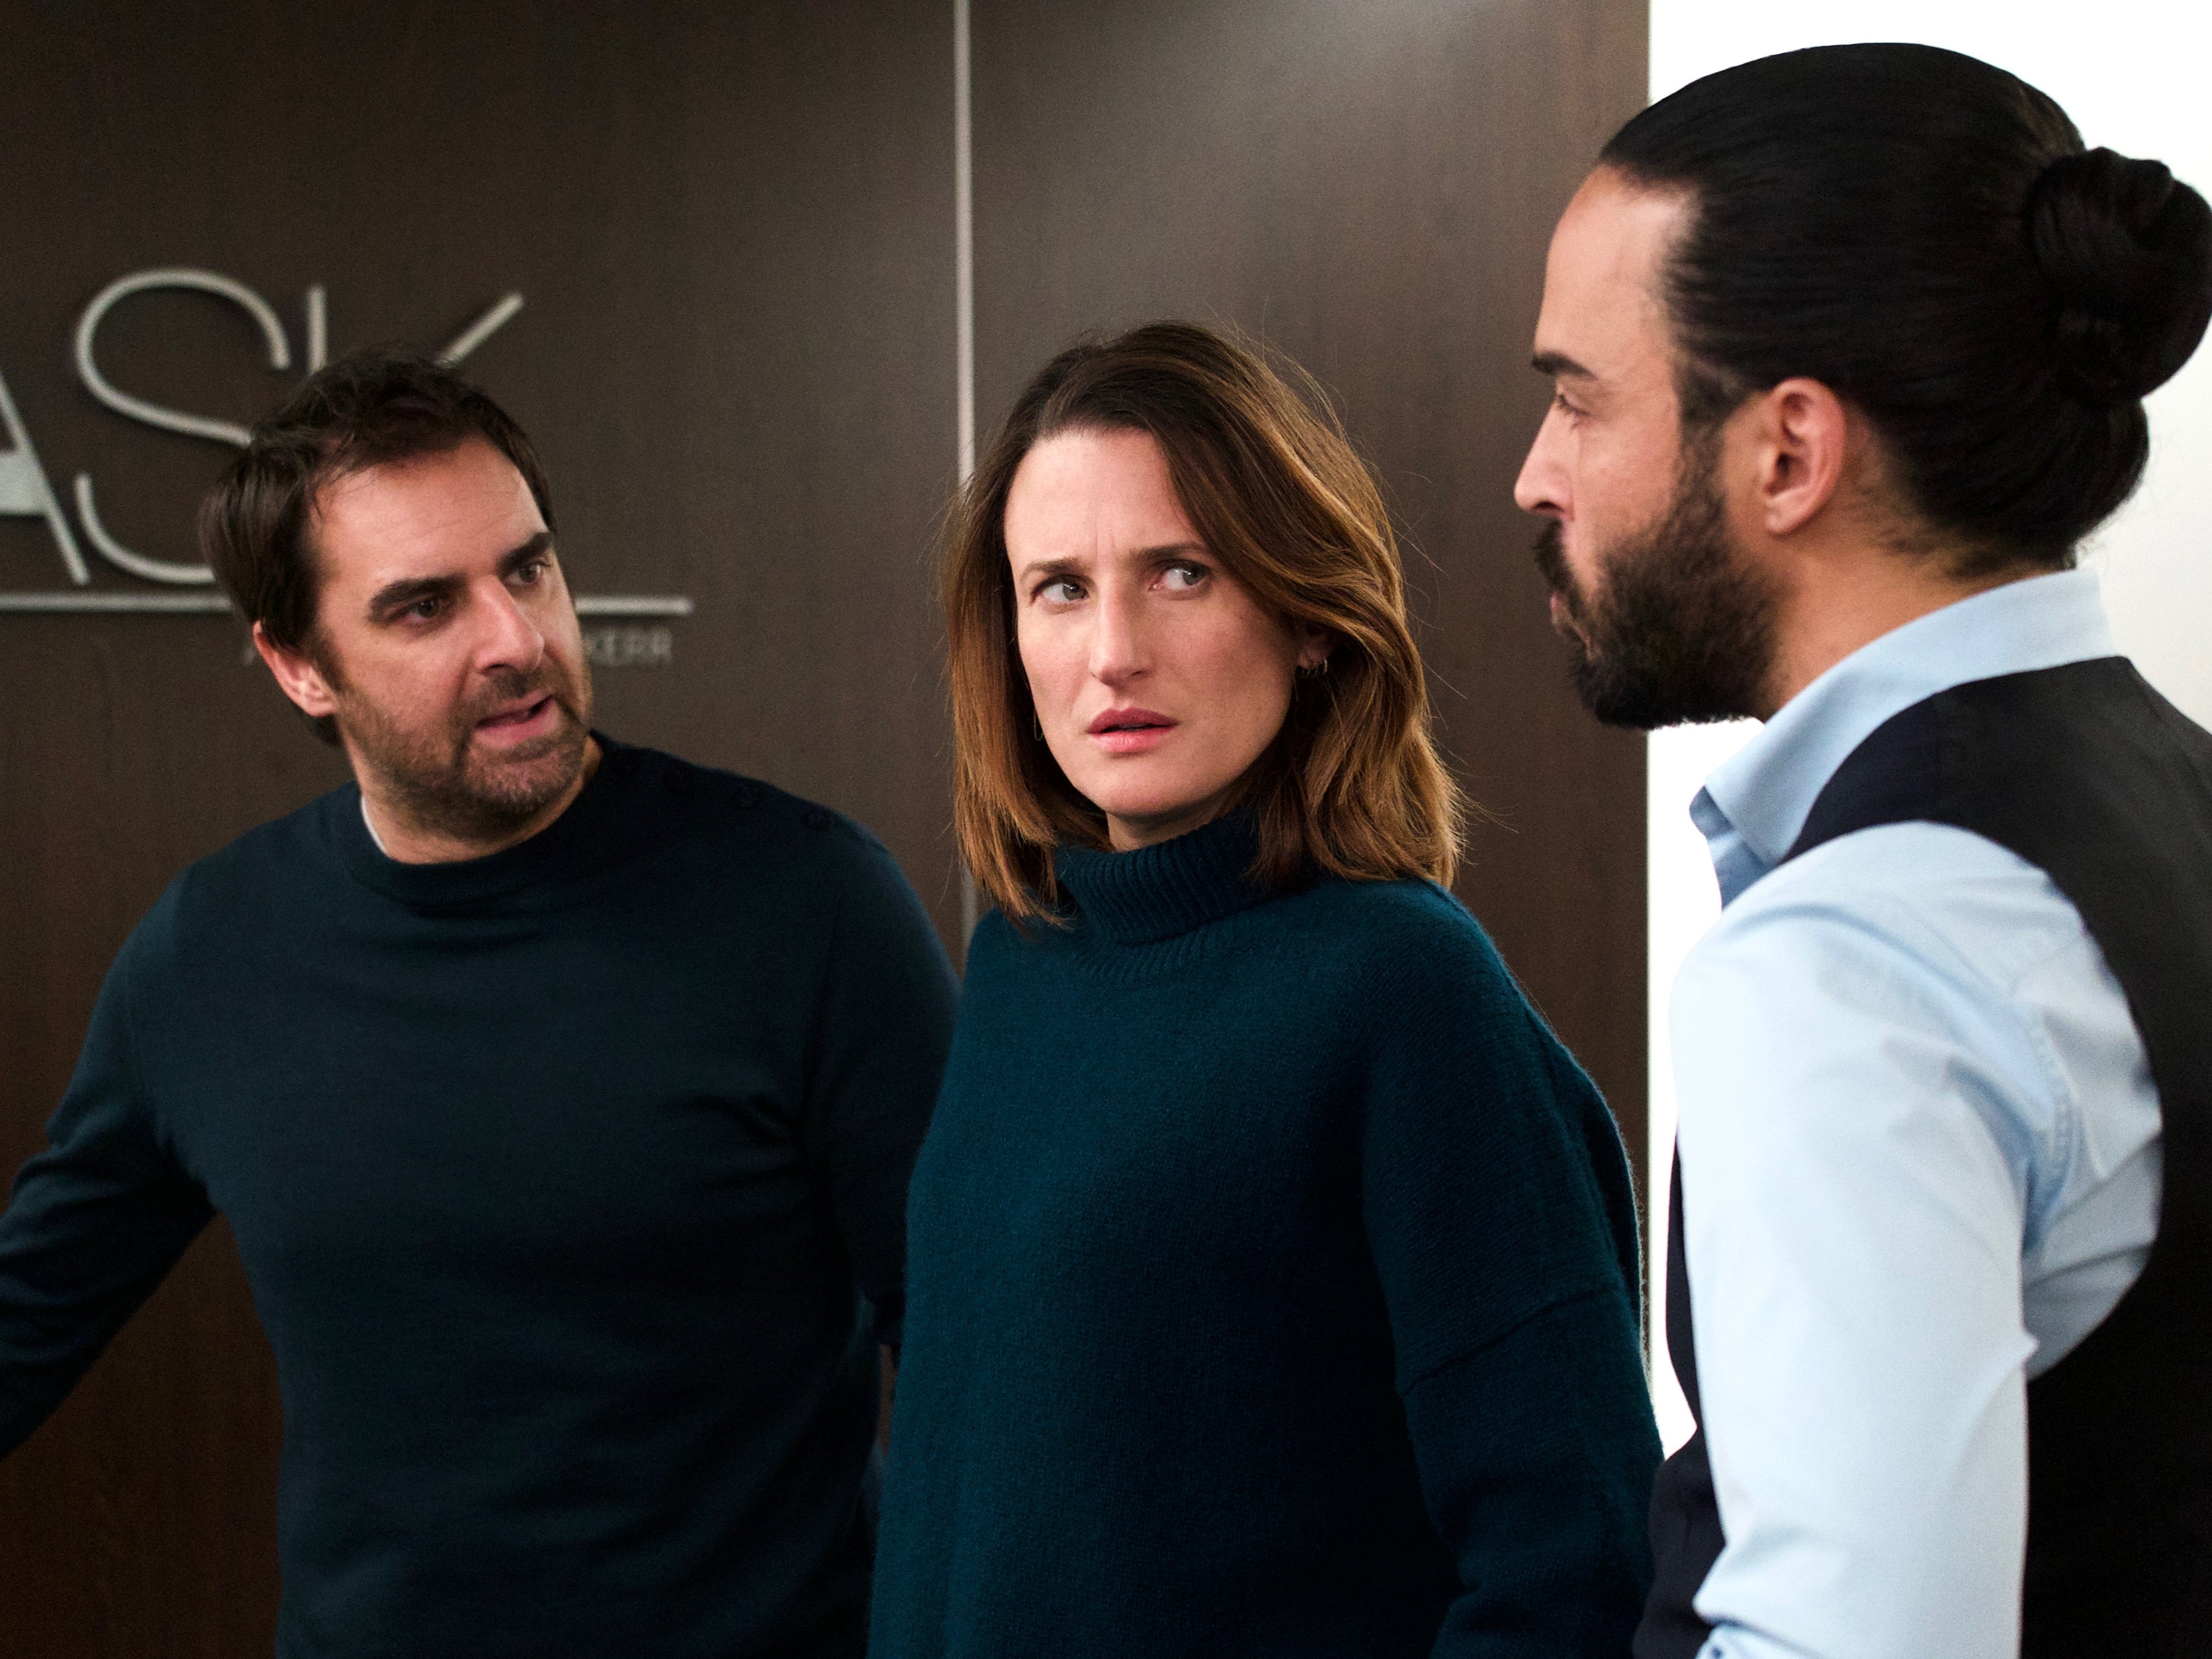 Level playing field: Grégory Montel, Camille Cottin and Assaad Bouab in Call My Agent!